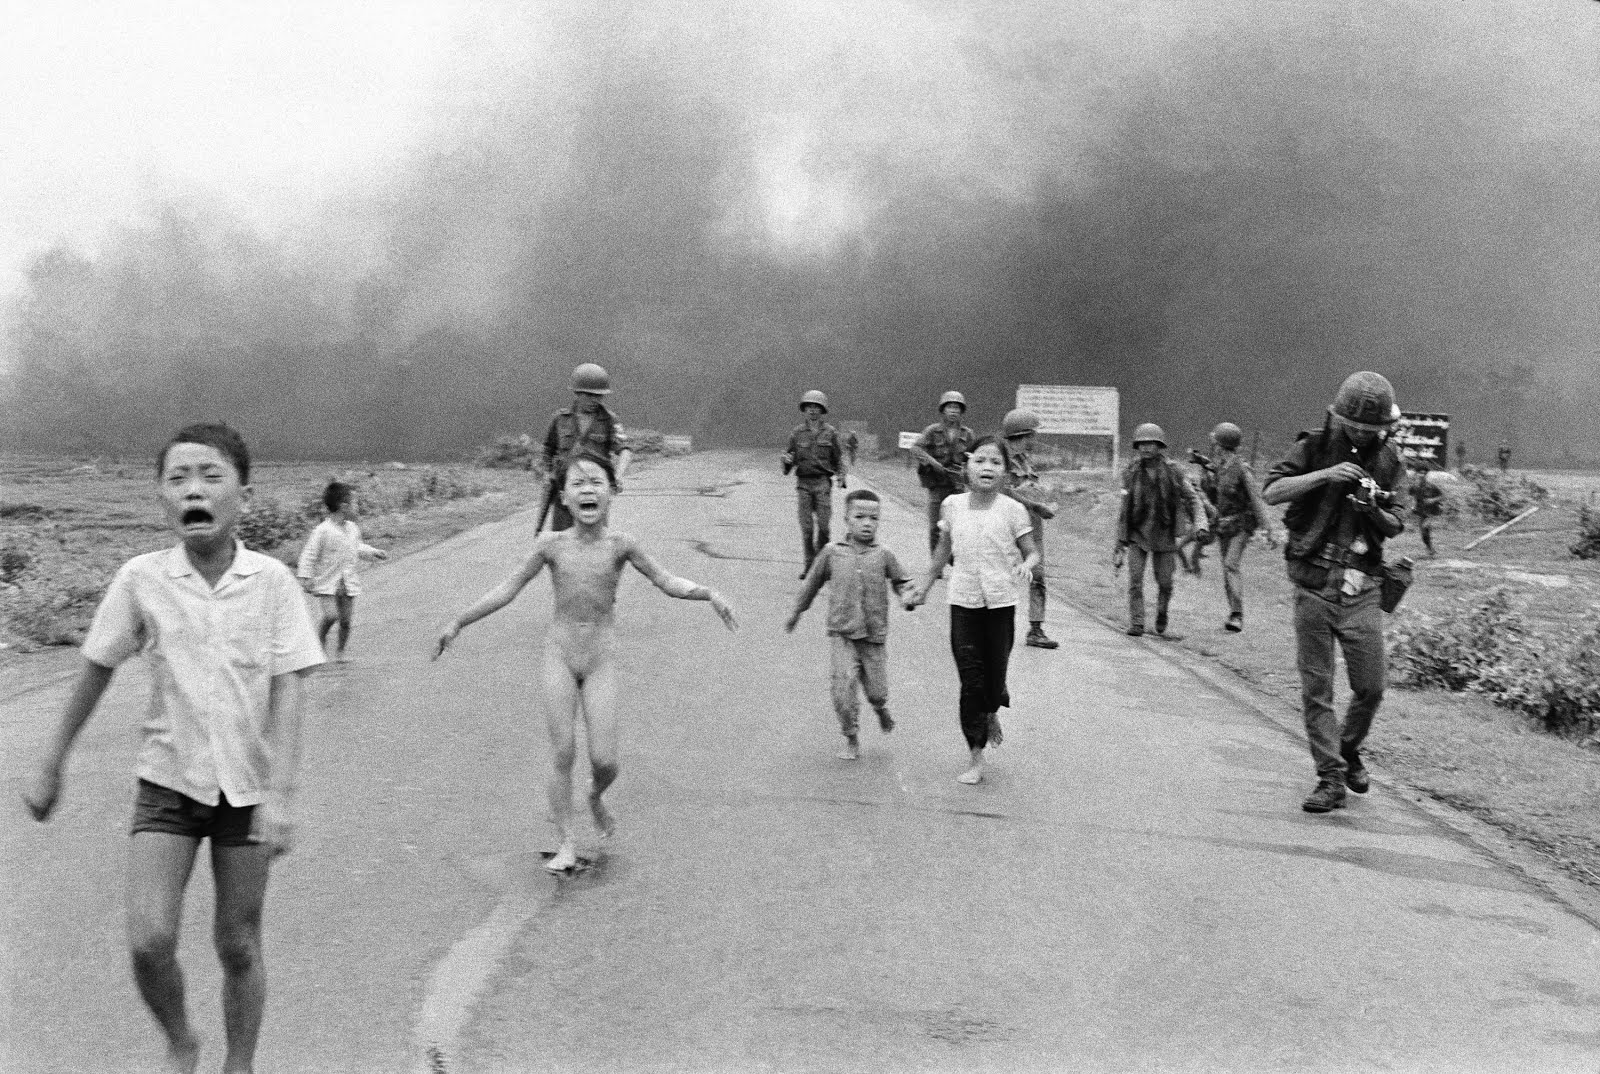 THE TRUE CONDUCT OF TH VIETNAM VETERAN - WITH THE VIETNAMESE WOMEN AND CHILDREN - THE LITTLE NAPALM